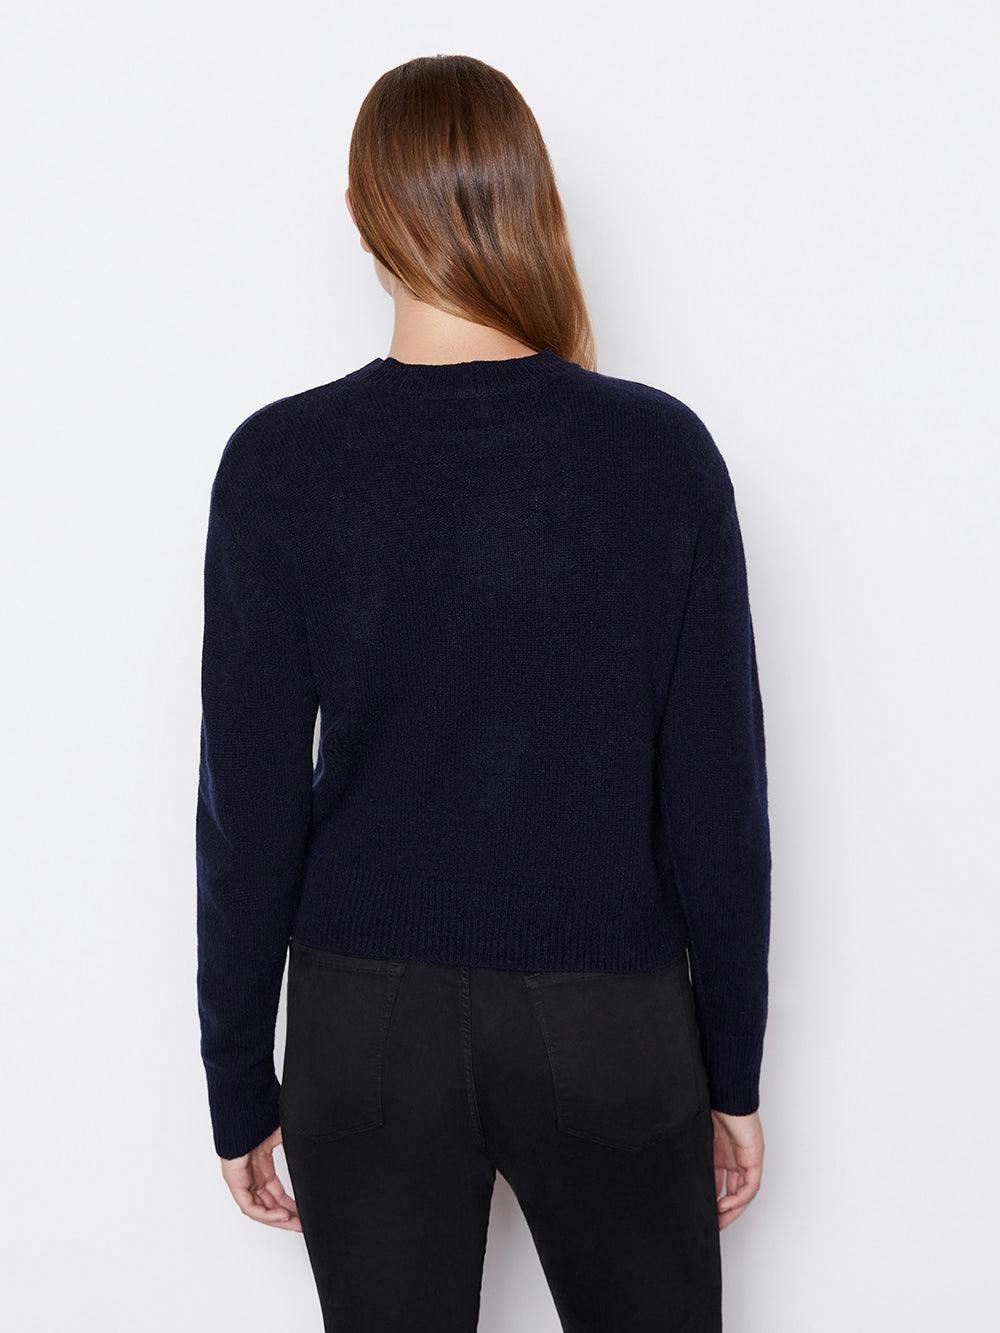 sweater back view